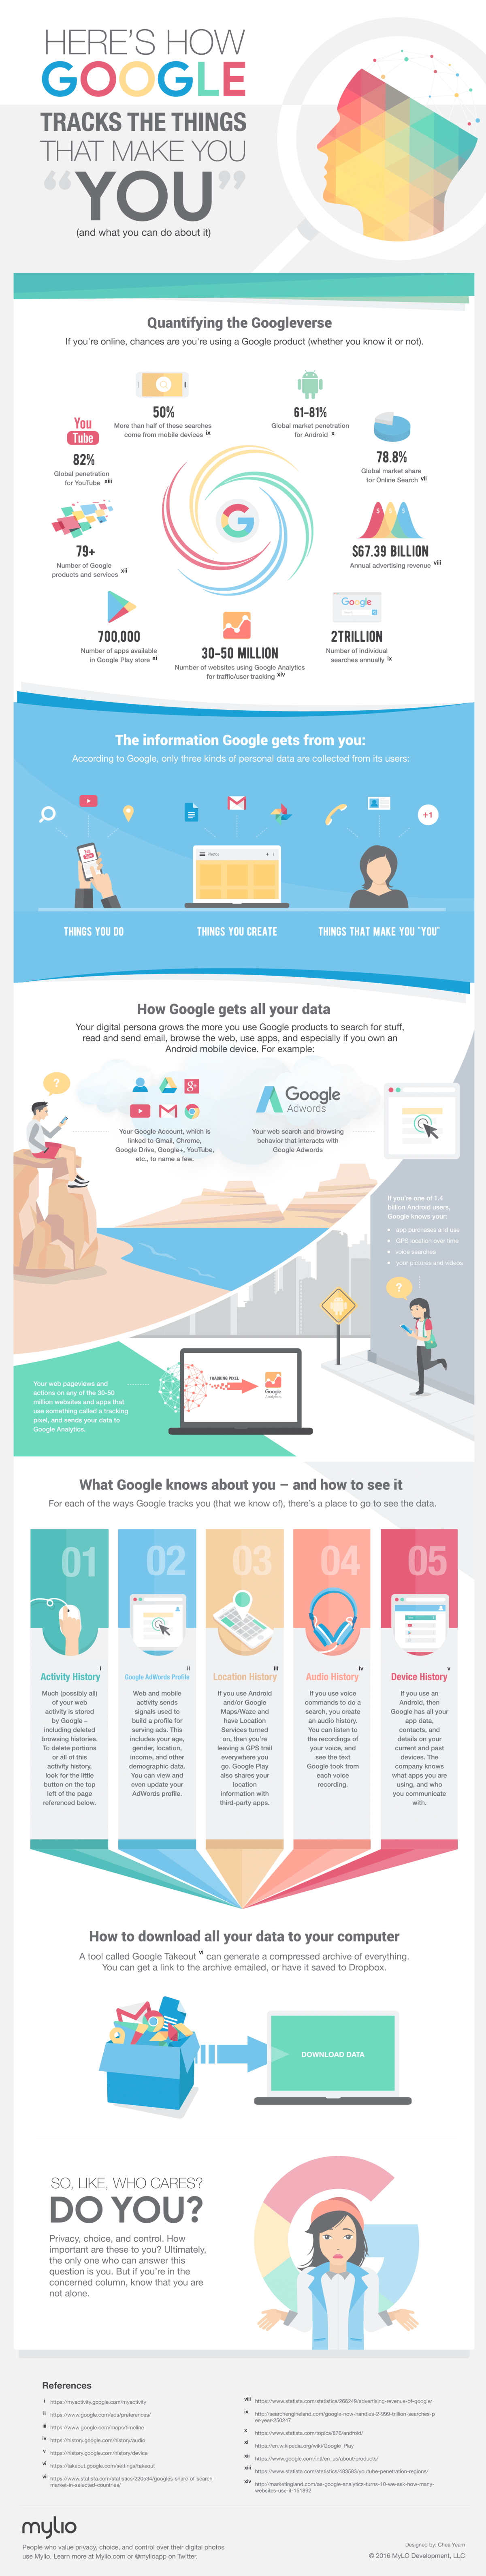 Here’s How Google Tracks You – and What You Can Do About It - #infographic